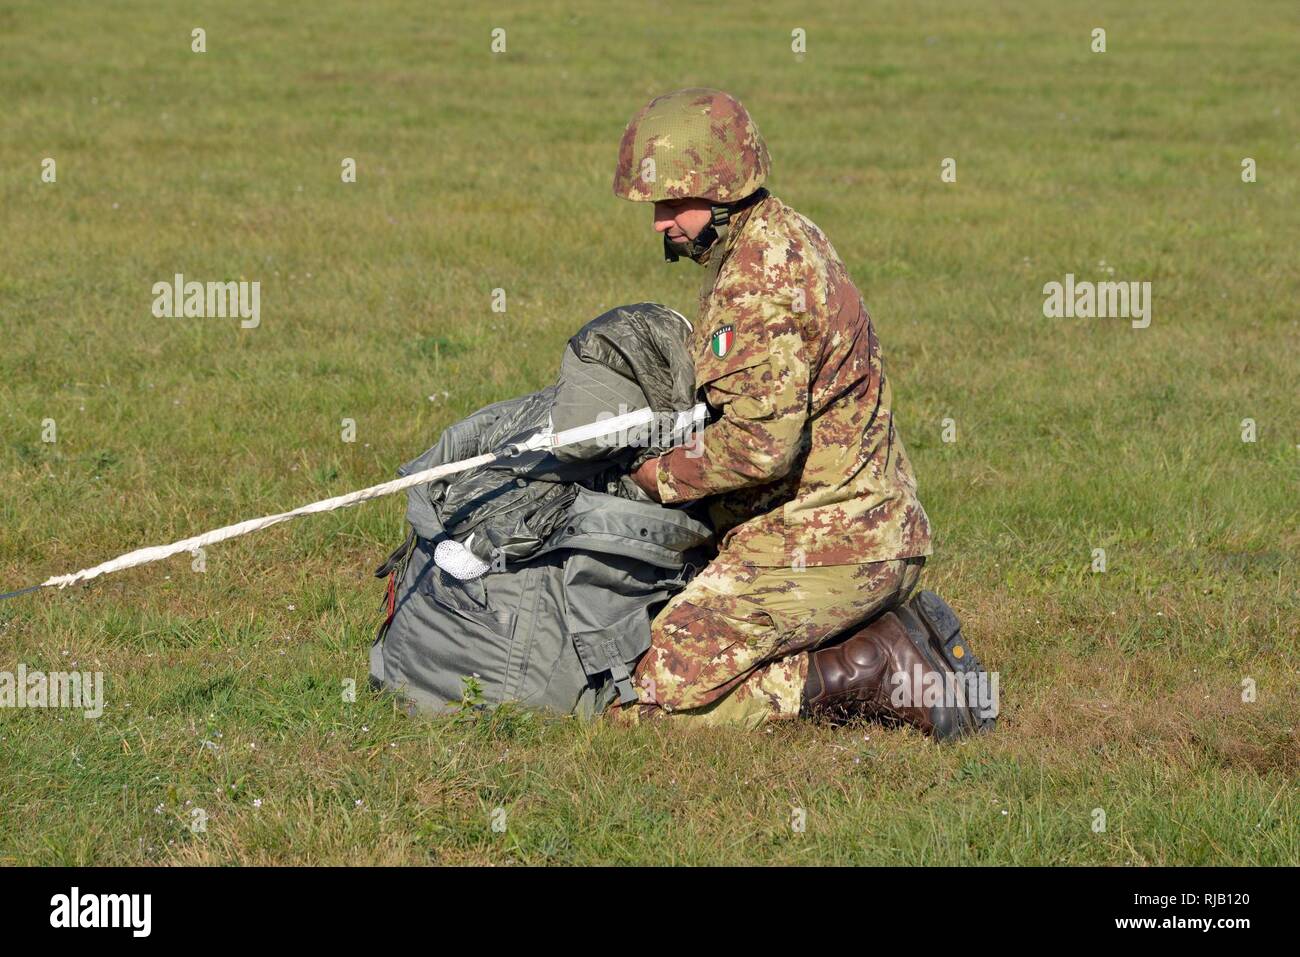 Italian Army paratrooper, Command Sgt. Maj. Simoni Roncari, recovers his T-11 parachute after conducting airborne operations onto Juliet Drop Zone in Pordenone in Italy, Nov. 3, 2016. Stock Photo